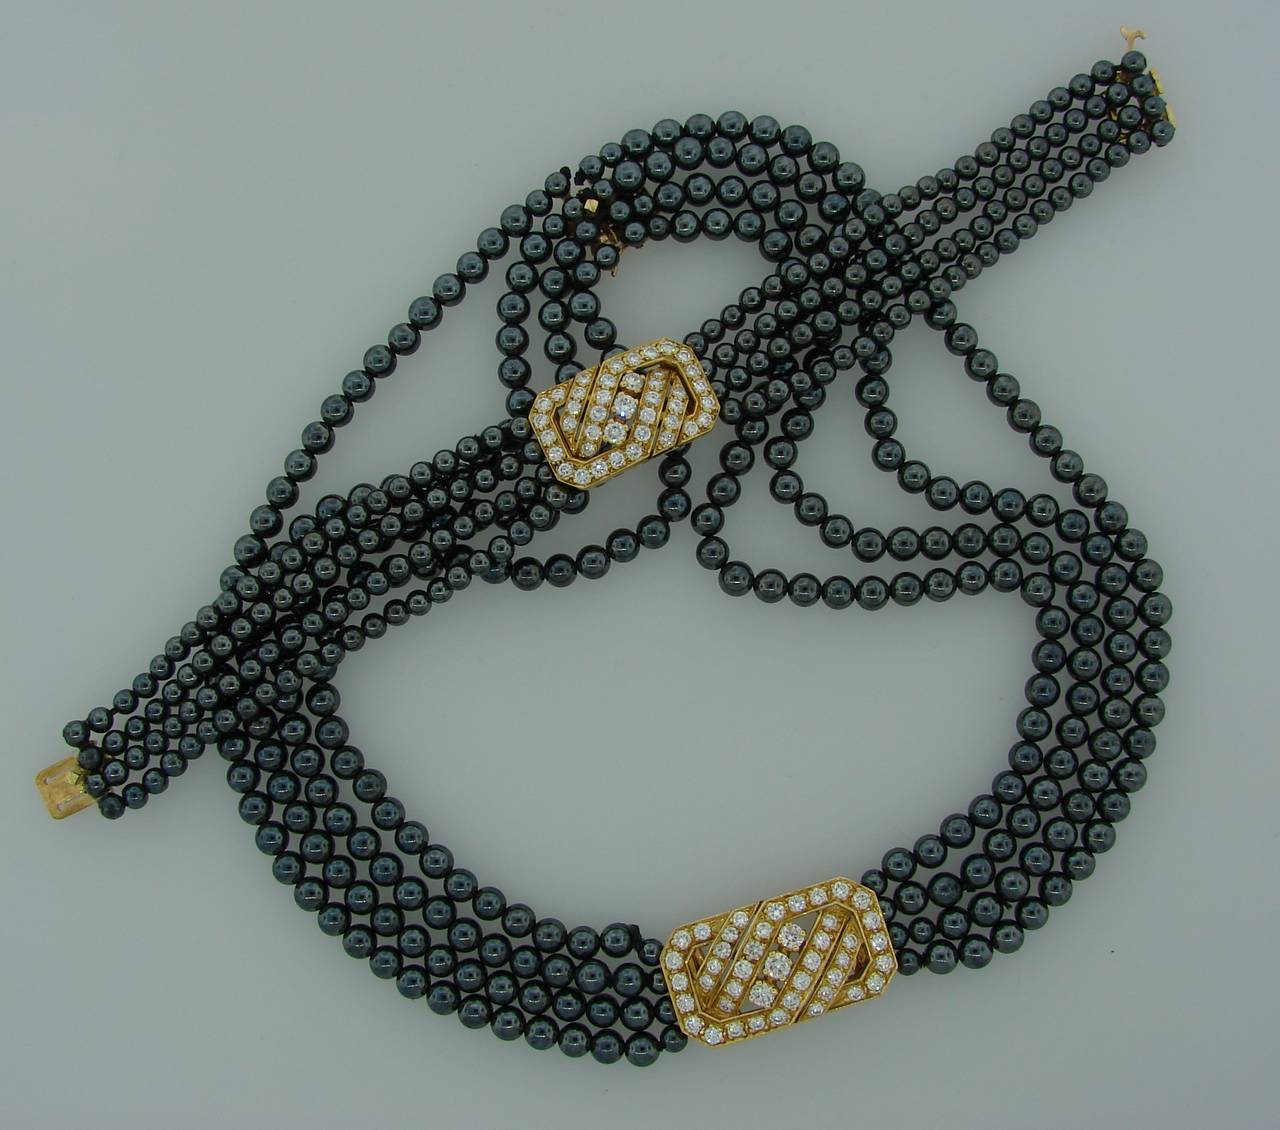 Elegant  and stylish necklace created by Van Cleef & Arpels in France in the 1970's. Features four strands of hematite beads connected with a beautiful diamond & yellow gold clasp. Versatile - can be worn as a longer necklace which gives